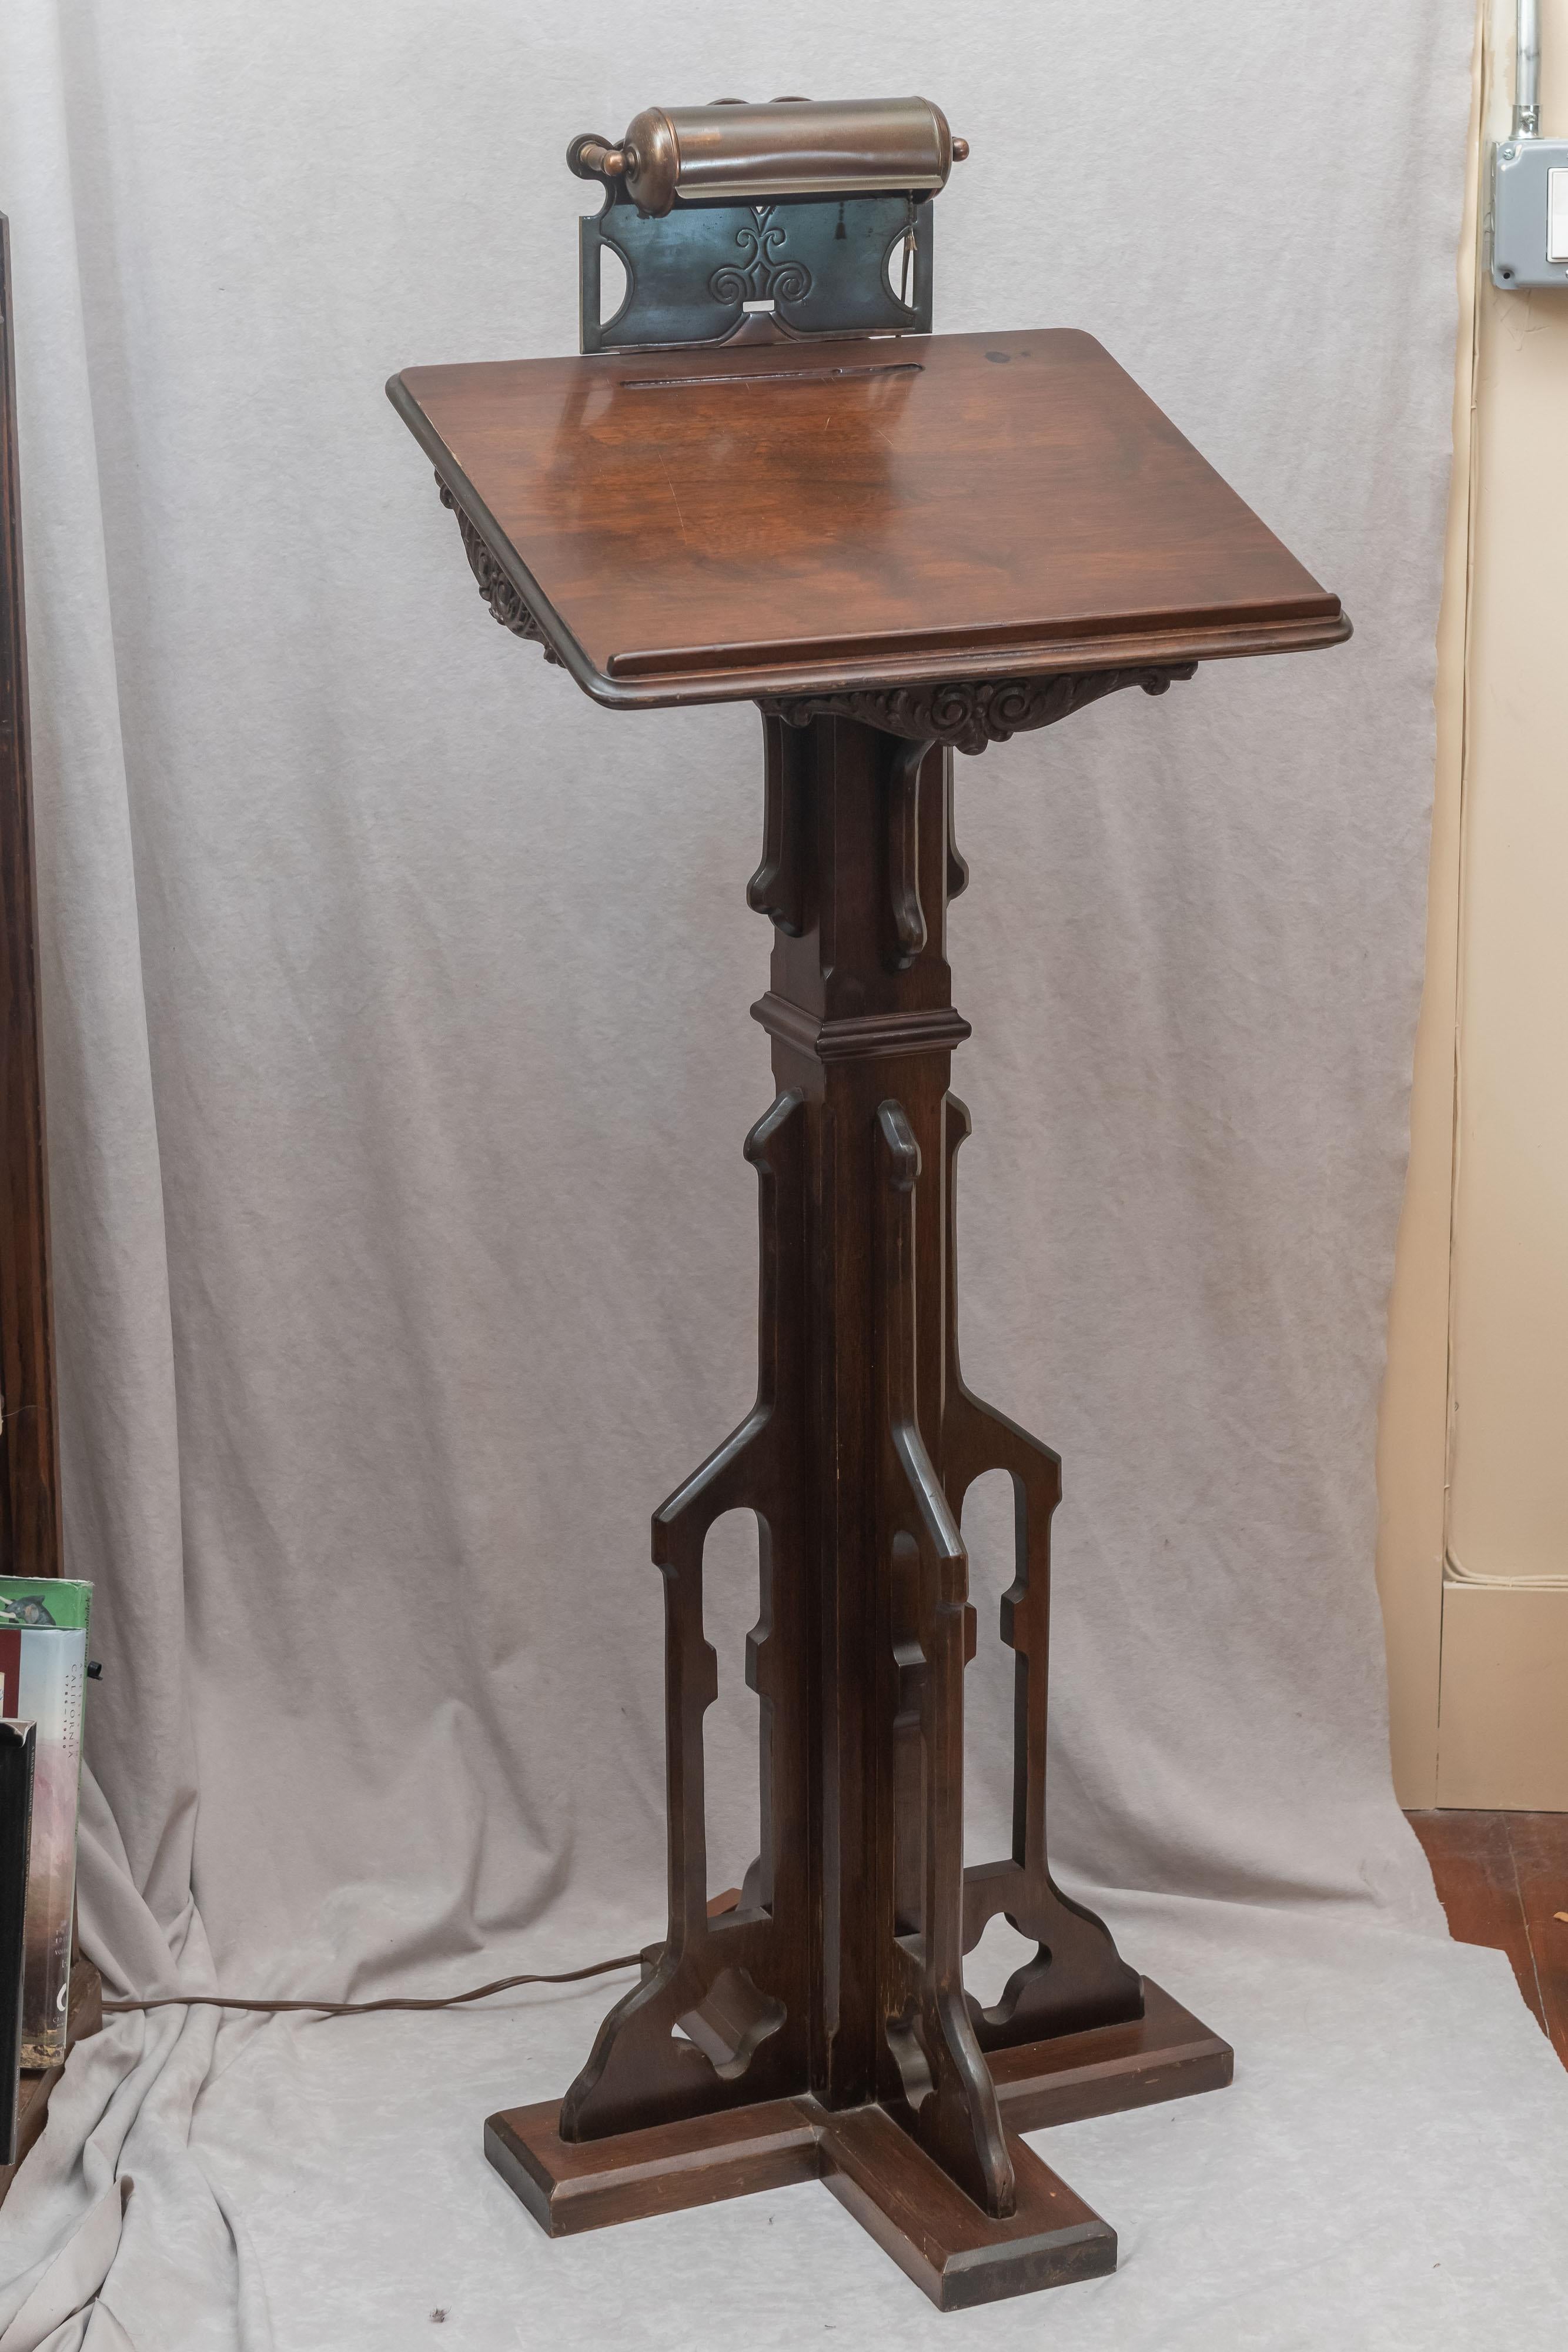 A very practical and well made piece of furniture that can be used for many tasks. We have had a few others in our over 45 years of selling antiques. People have used them for stand up desks, lecterns, dictionary stands and for registration in